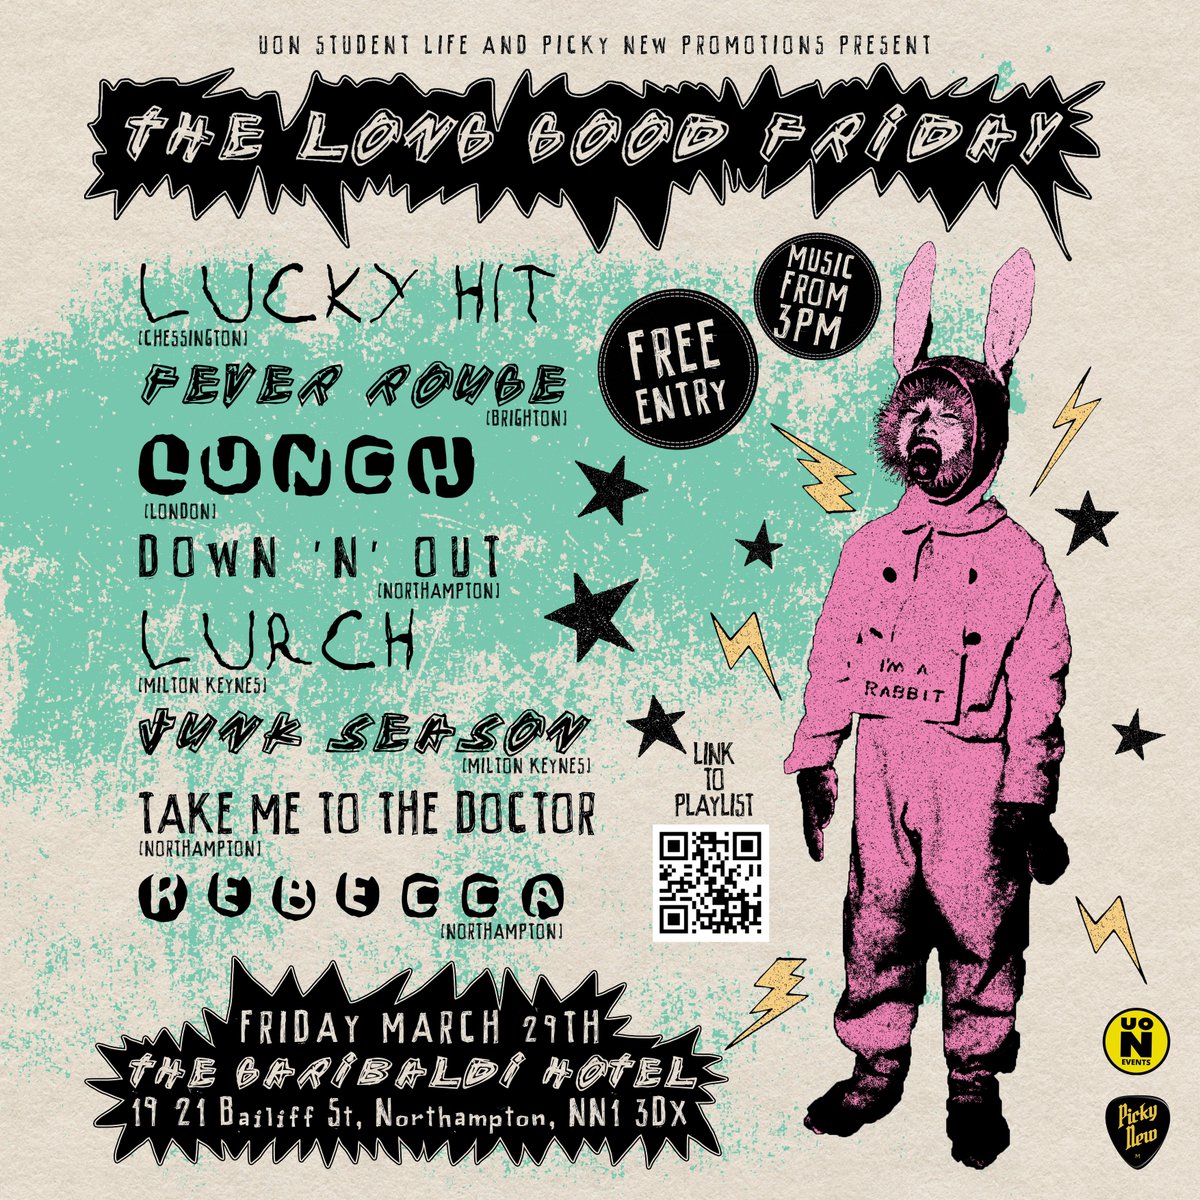 THE LONG GOOD FRIDAY ALL-DAYER! Eight bands, eight hours of pop punk, post punk, and grunge. At the @gbhnorthampton on Fri Mar 29, music starting at 3 pm. 18+ only. Featuring @luckyhituk , Fever Rouge, Lunch, Down 'n' Out, Lurch, Junk Season, Take Me To the Doctor, and REBECCA.